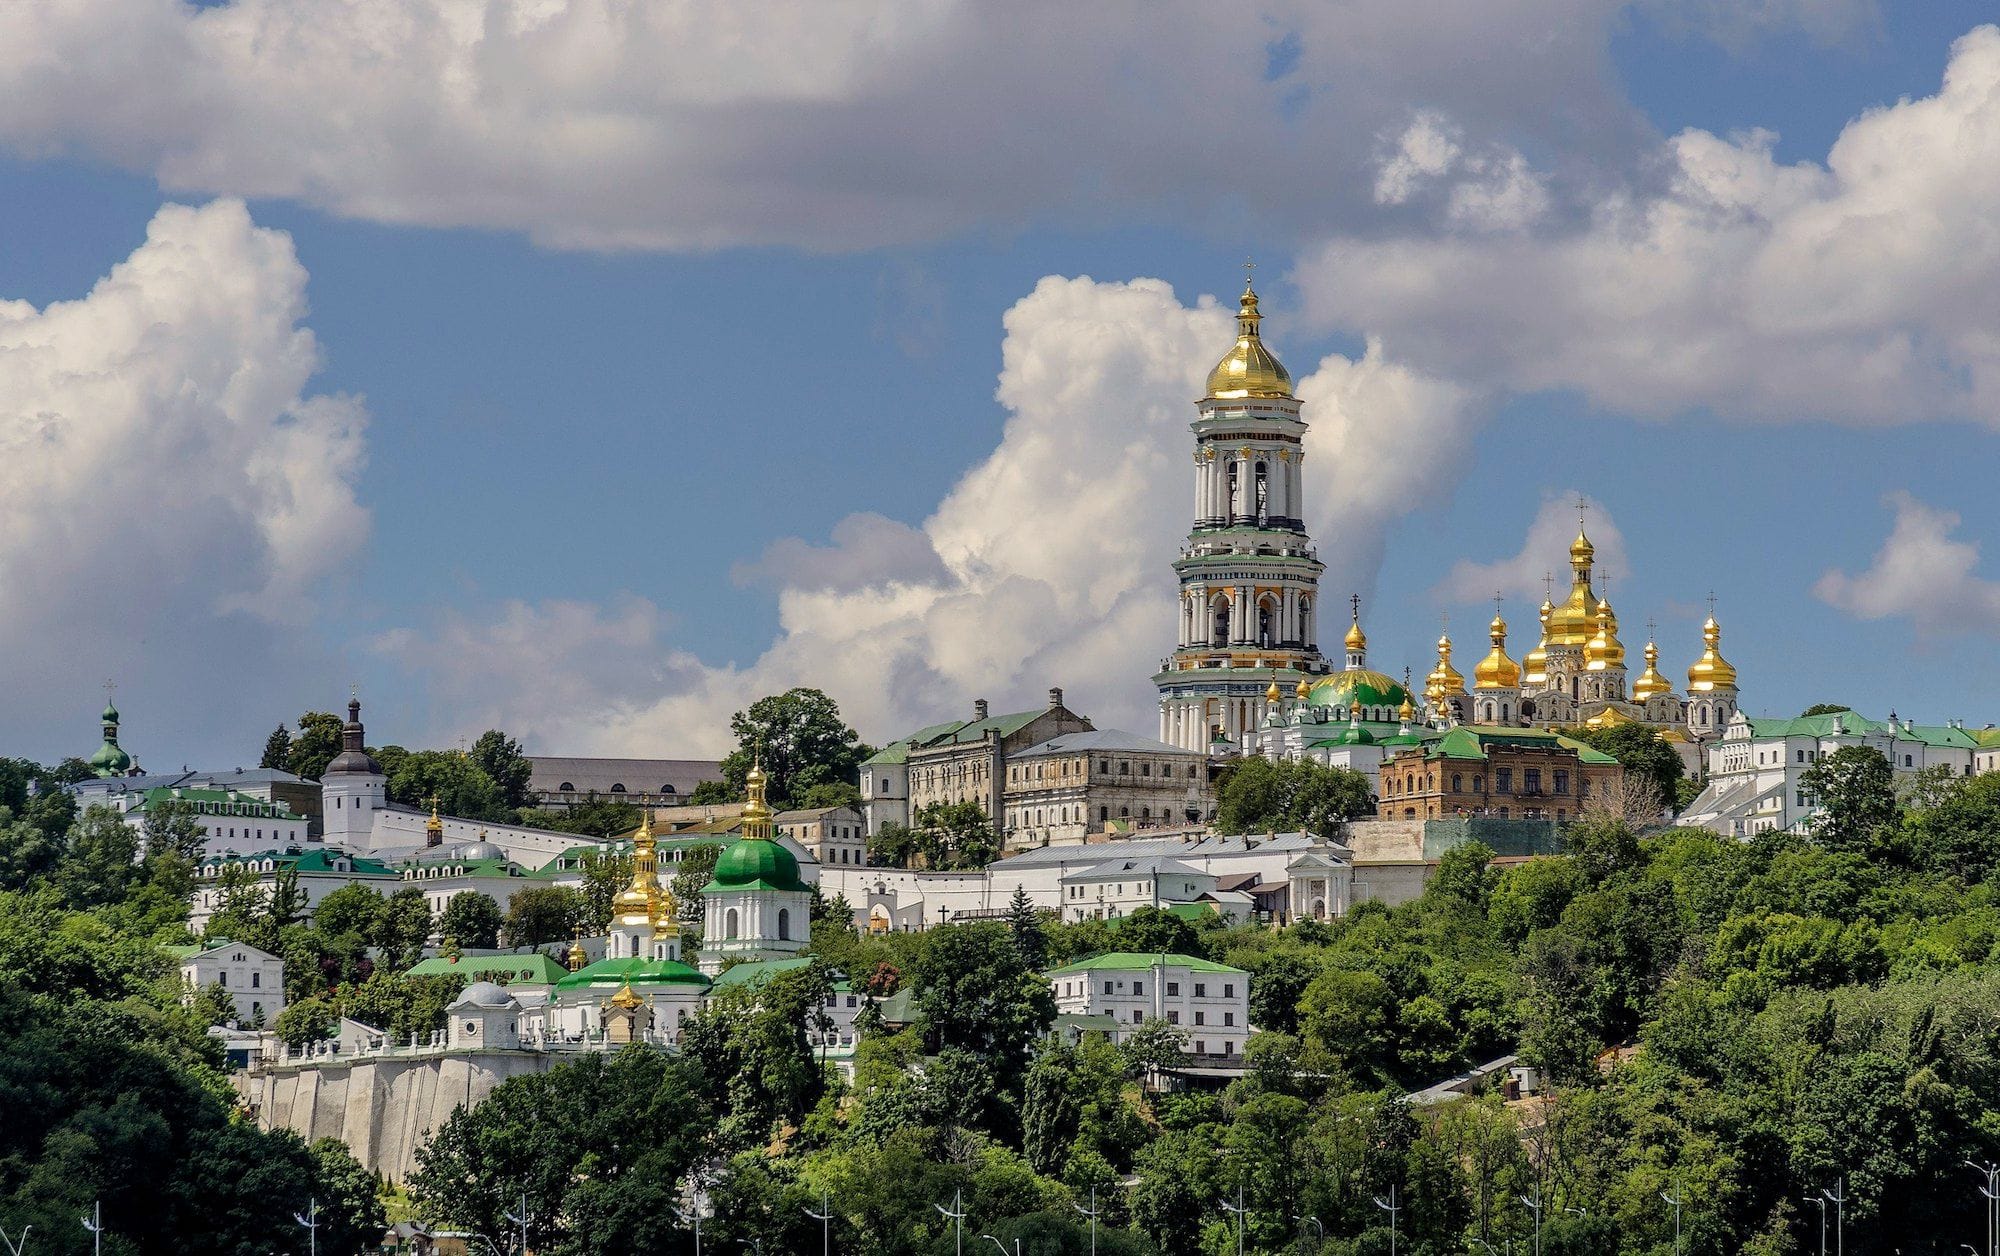 Unesco adds sites in Kyiv and Lviv to list of world heritage in danger